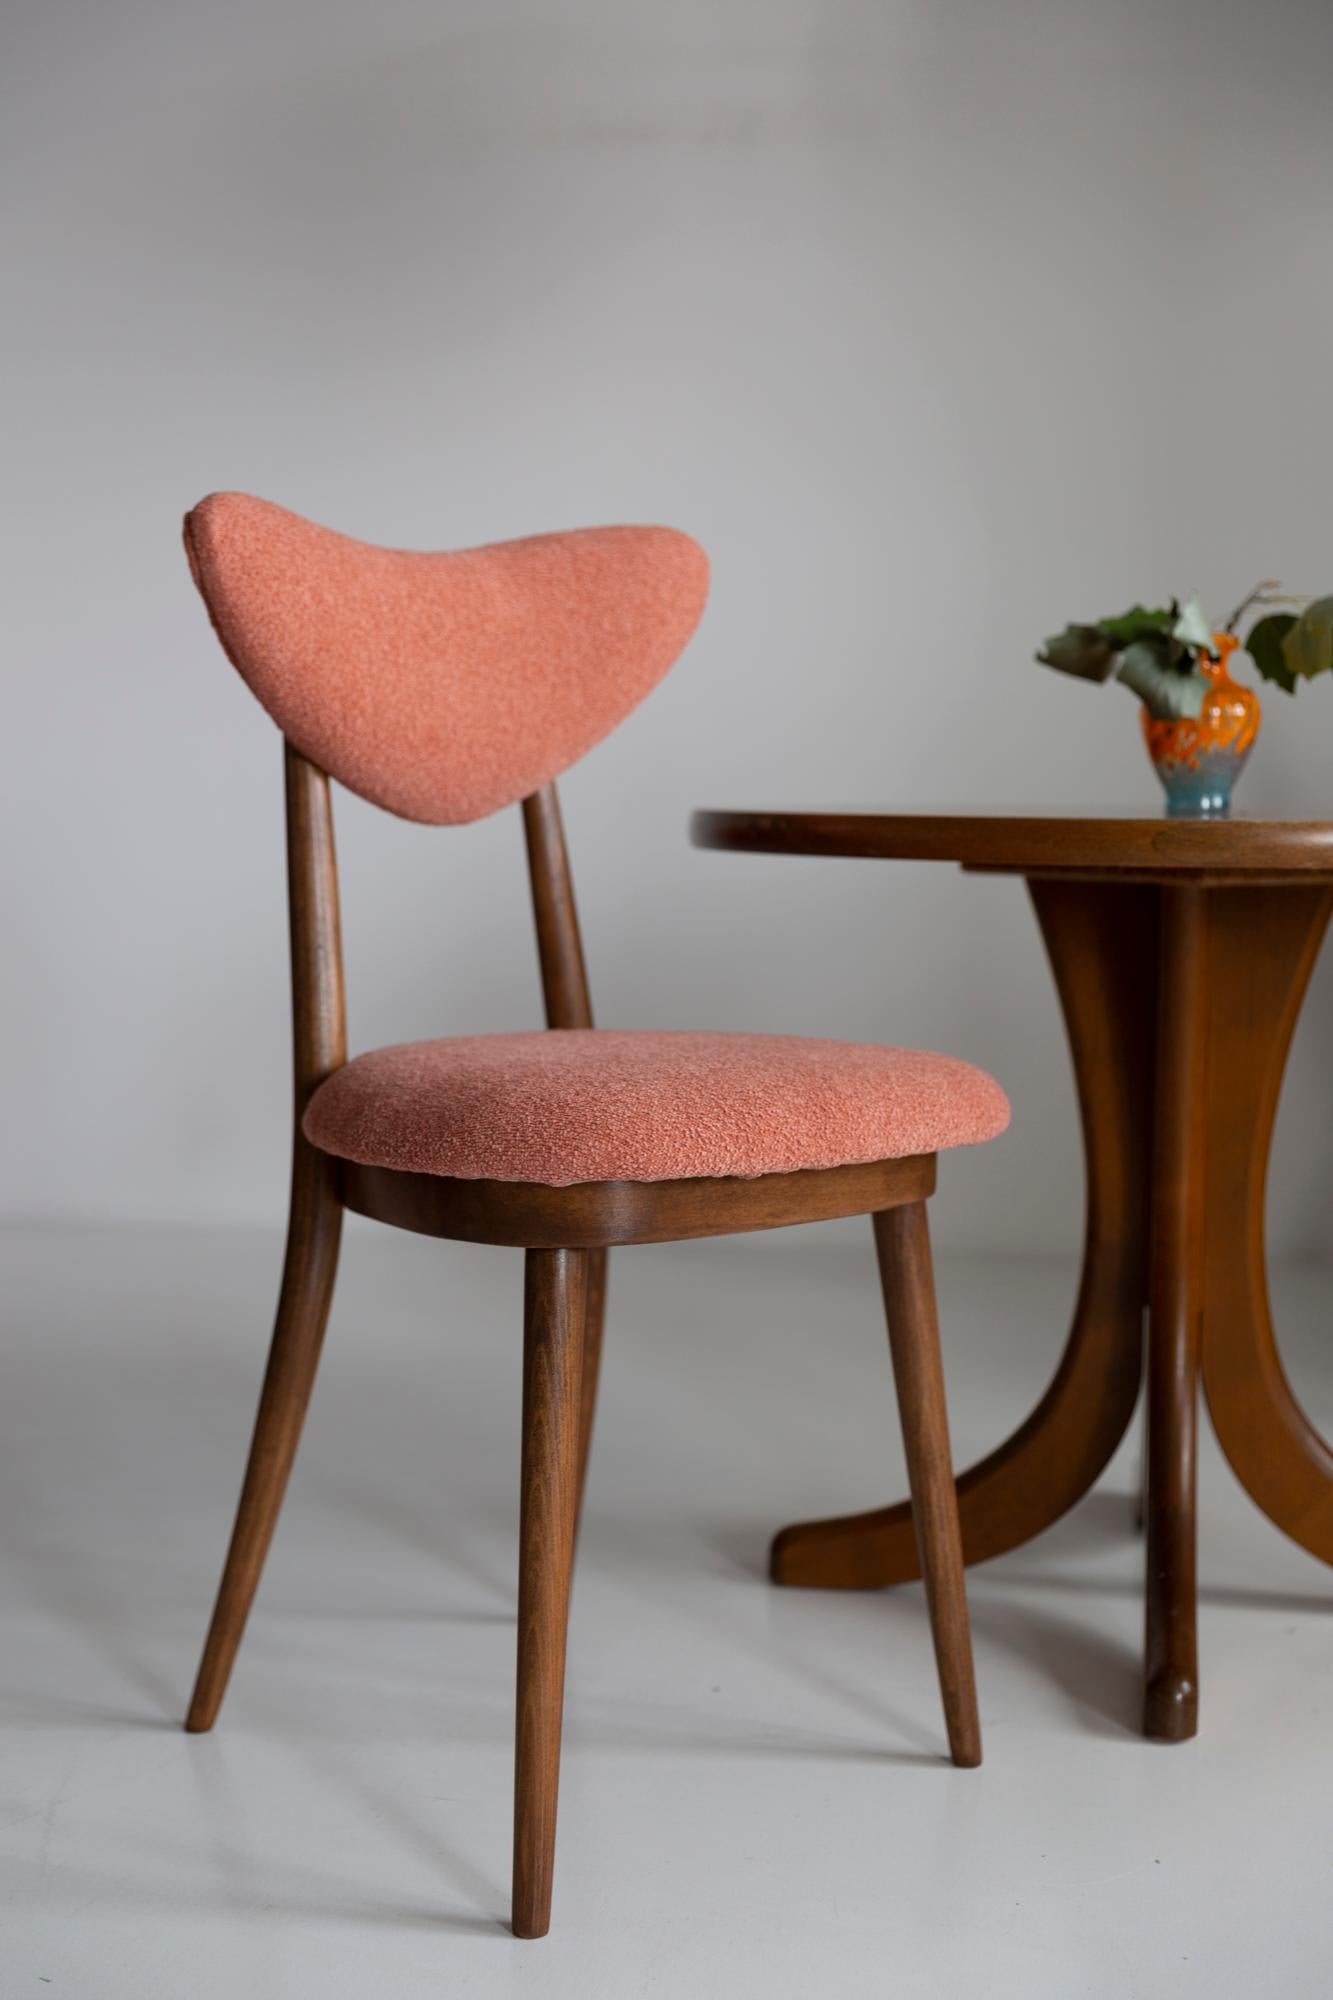 Hand-Crafted Set of Four Midcentury Orange Velvet Heart Chairs, Europe, 1960s For Sale